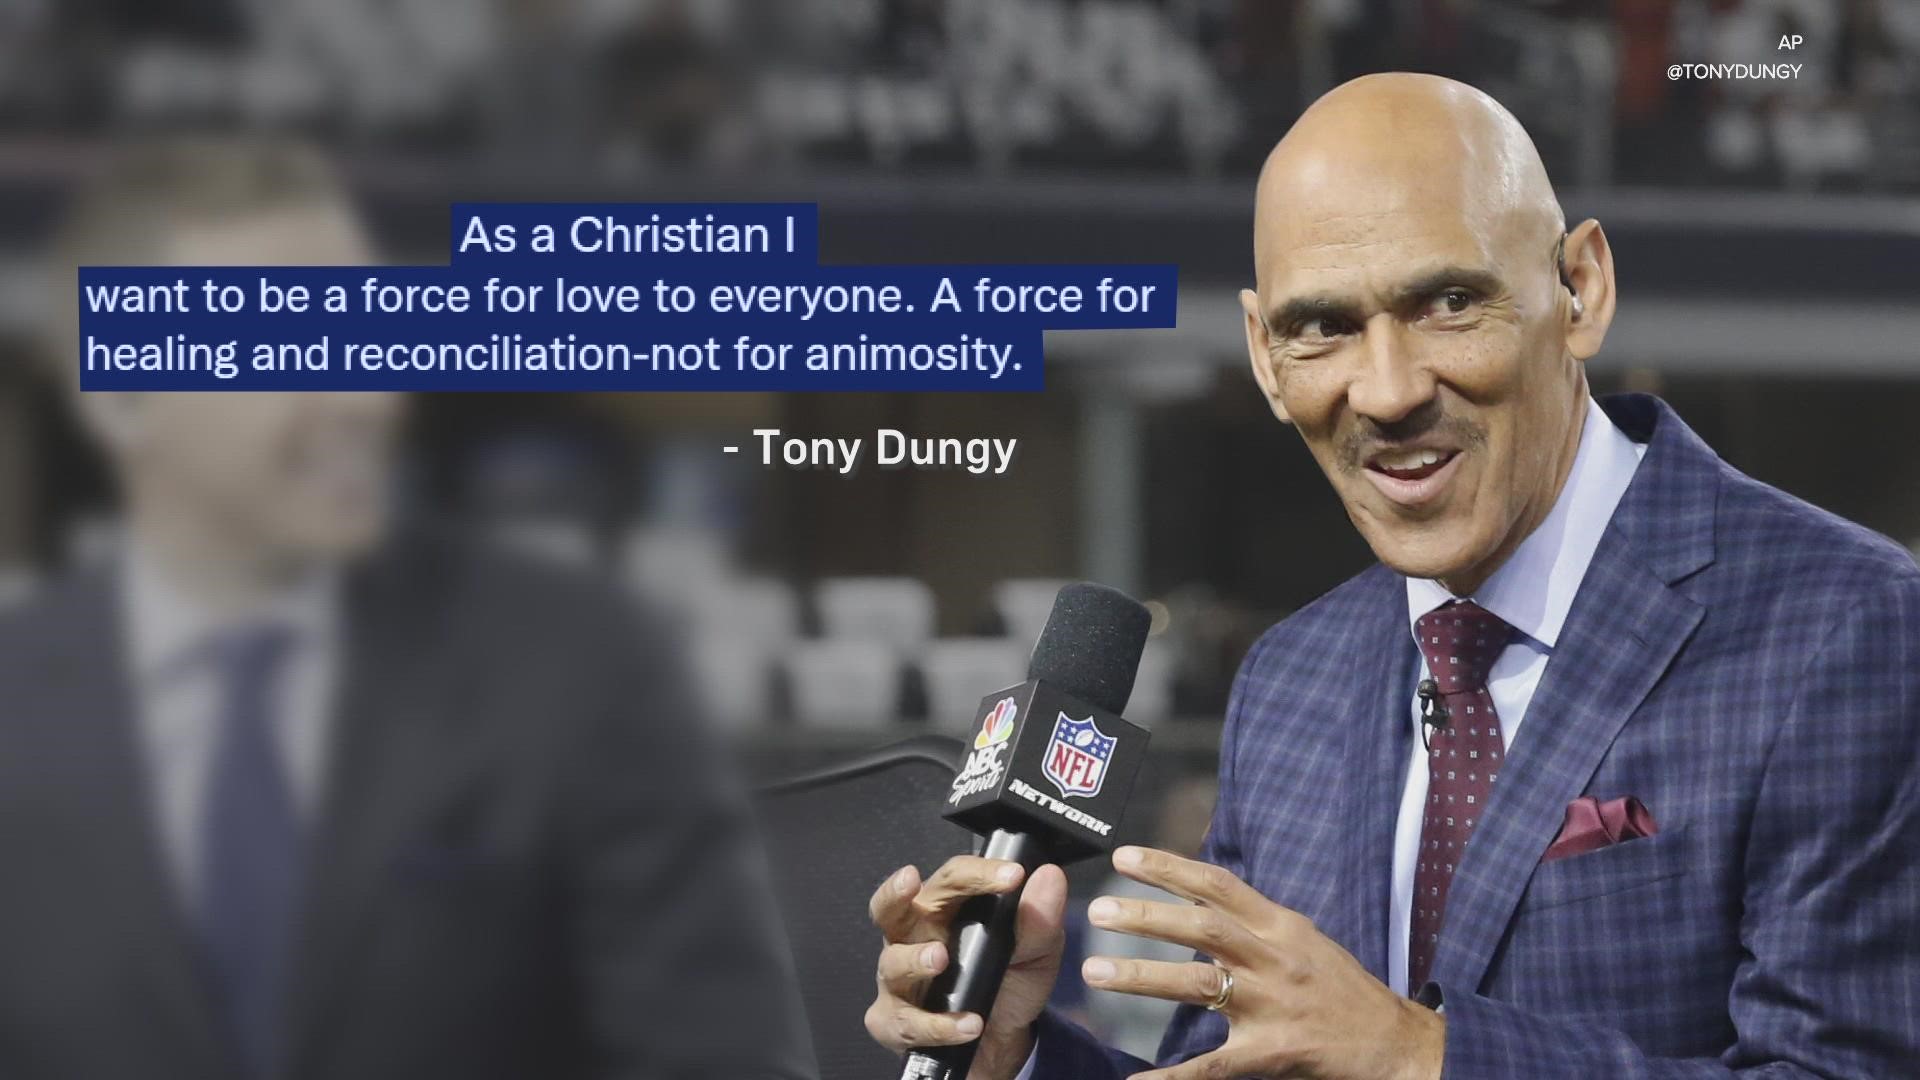 FORMER INDIANAPOLIS COLTS HEAD COACH TONY DUNGY APOLOGIZES FOR NOW DELETED CONTROVERSIAL CAT LITTER TWEET REGARDING A PROPOSED BILL IN  MINNESOTA THAT WOULD REQUIRE MENSTRUAL PRODUCTS IN BOYS’ BATHROOMS IN SCHOOLS. Daniel Whyte III President of Gospel Light Society International says, Tony Dungy should not apologize for anything because those things and worse things are being done in our society and in our schools, and everybody knows it. The sad thing here, is that a football coach and football commentator has to speak about the demonic foolishness going on in our society, schools, and government because pastors and churches have failed God, Jesus Christ, the school system, the nation, and the world.